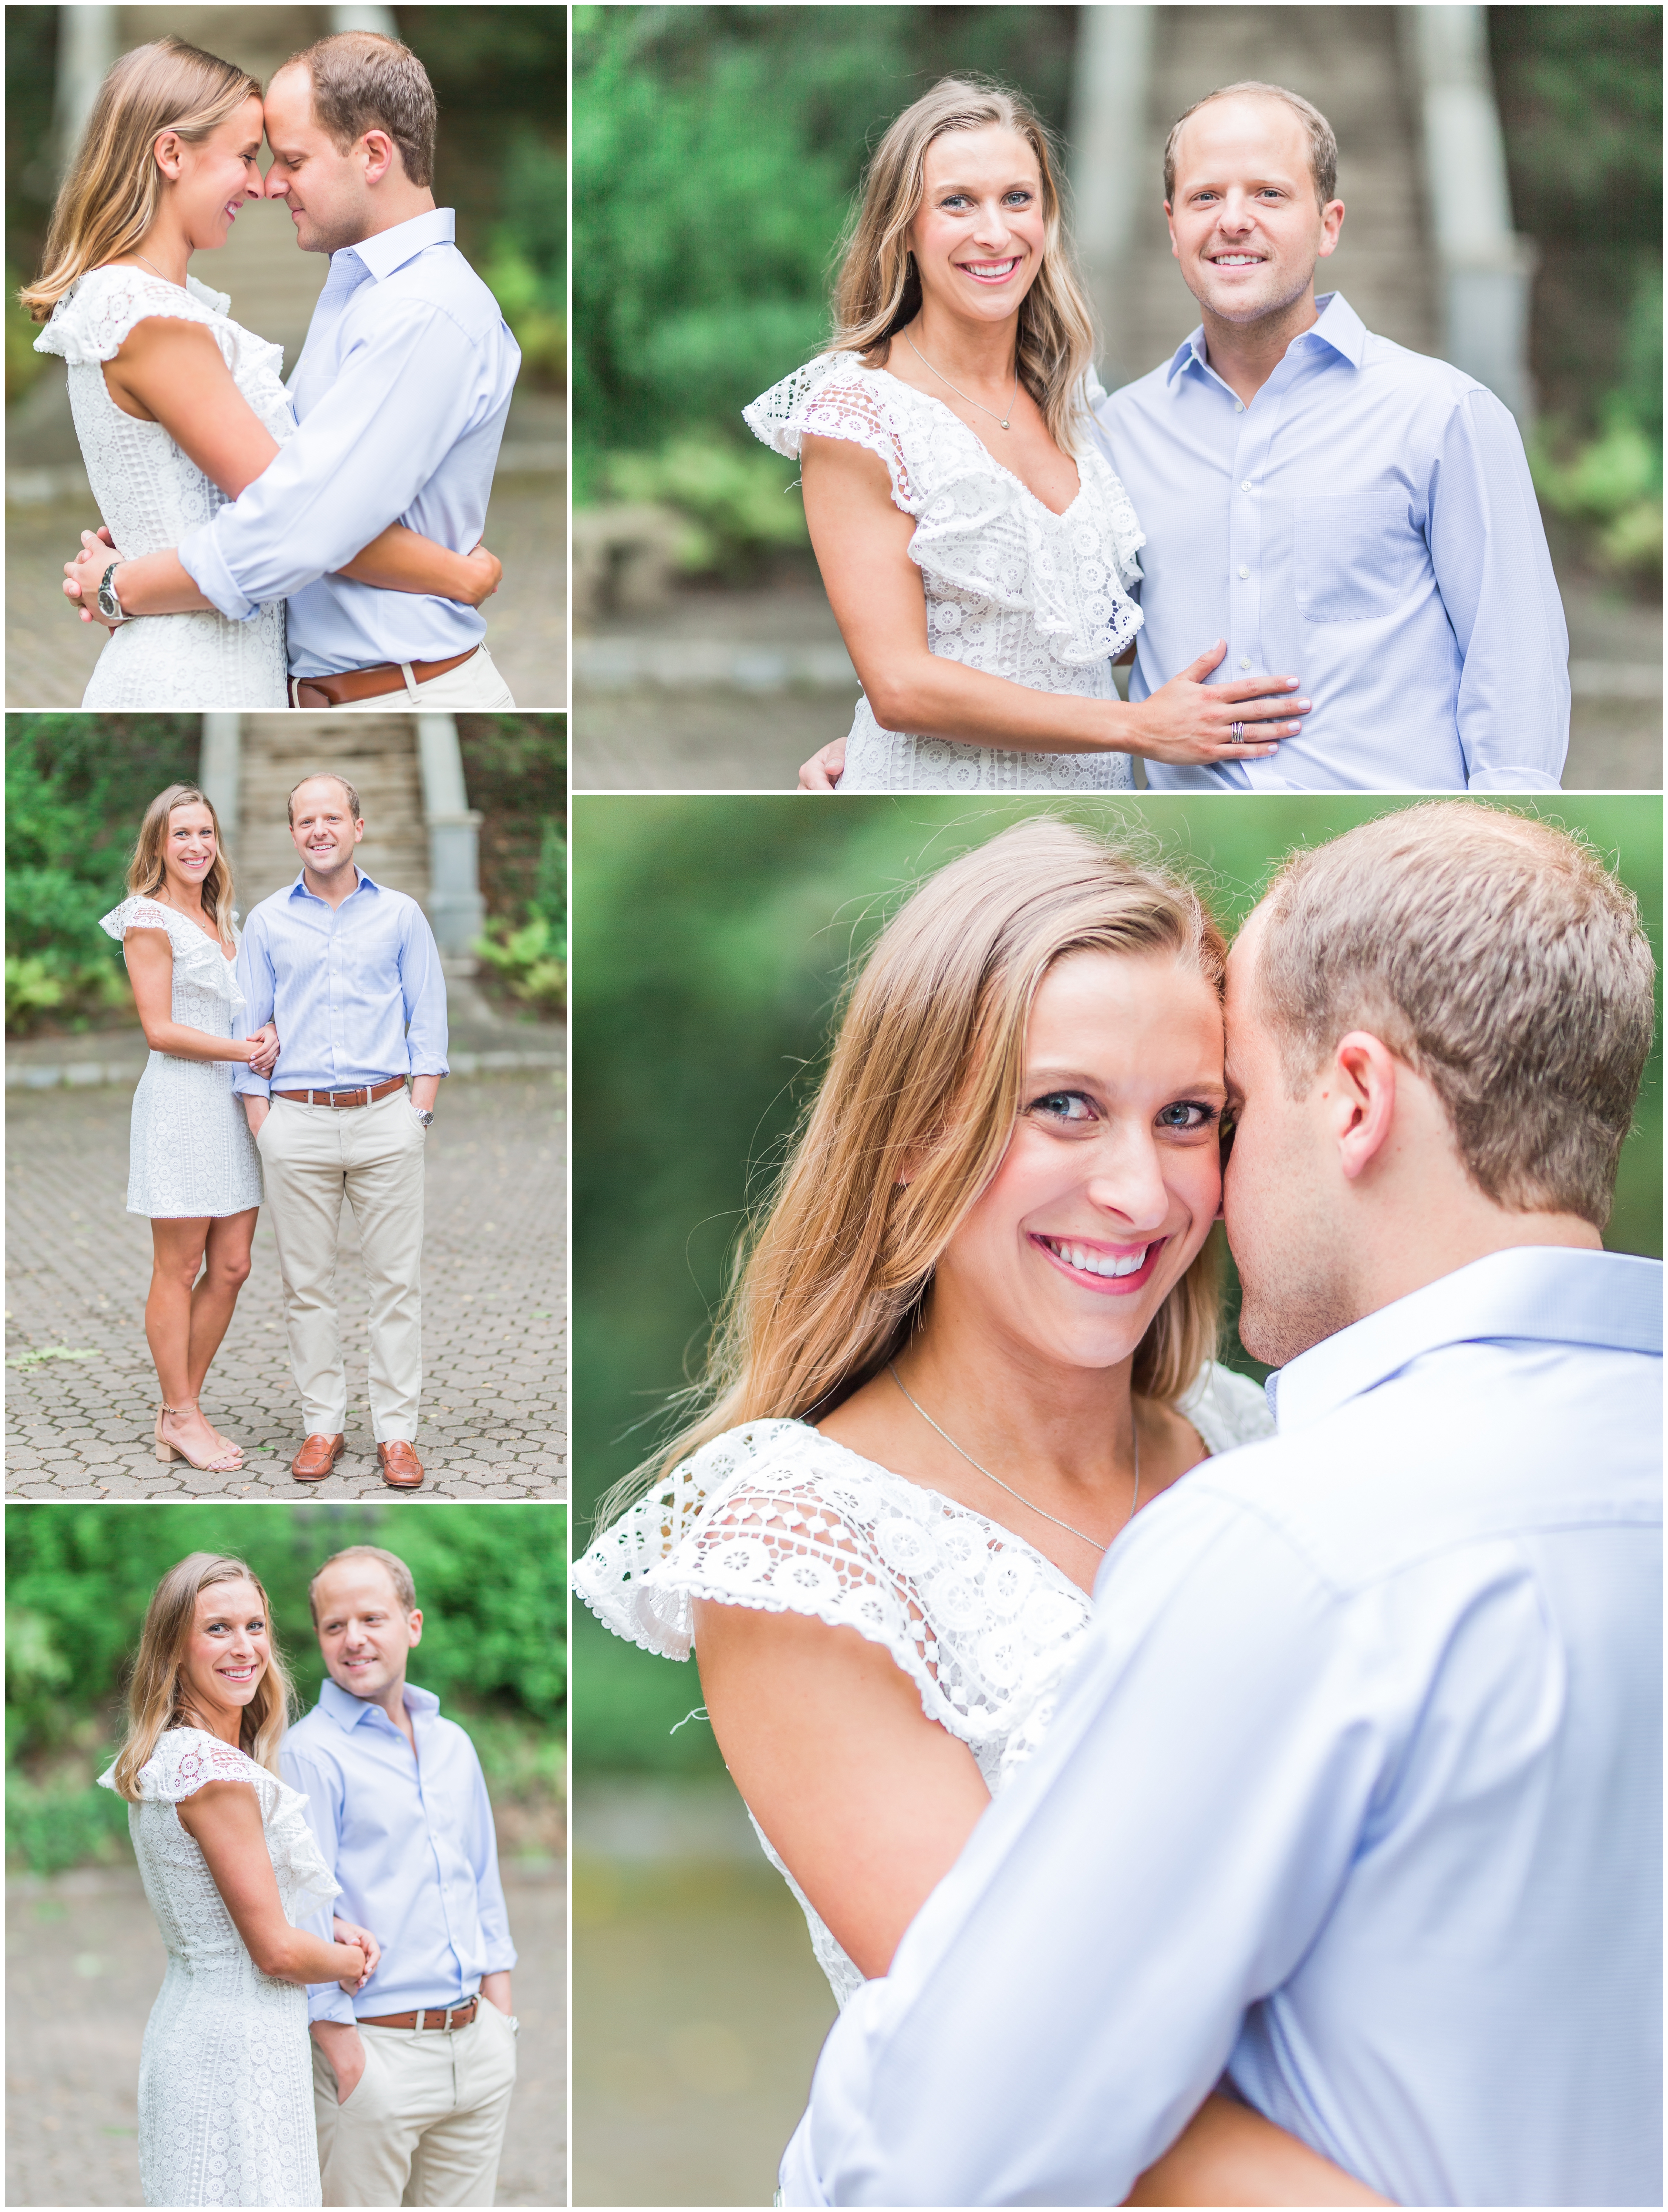 A Spring engagement session at Cator Woolford Gardens in Atlanta, Georiga